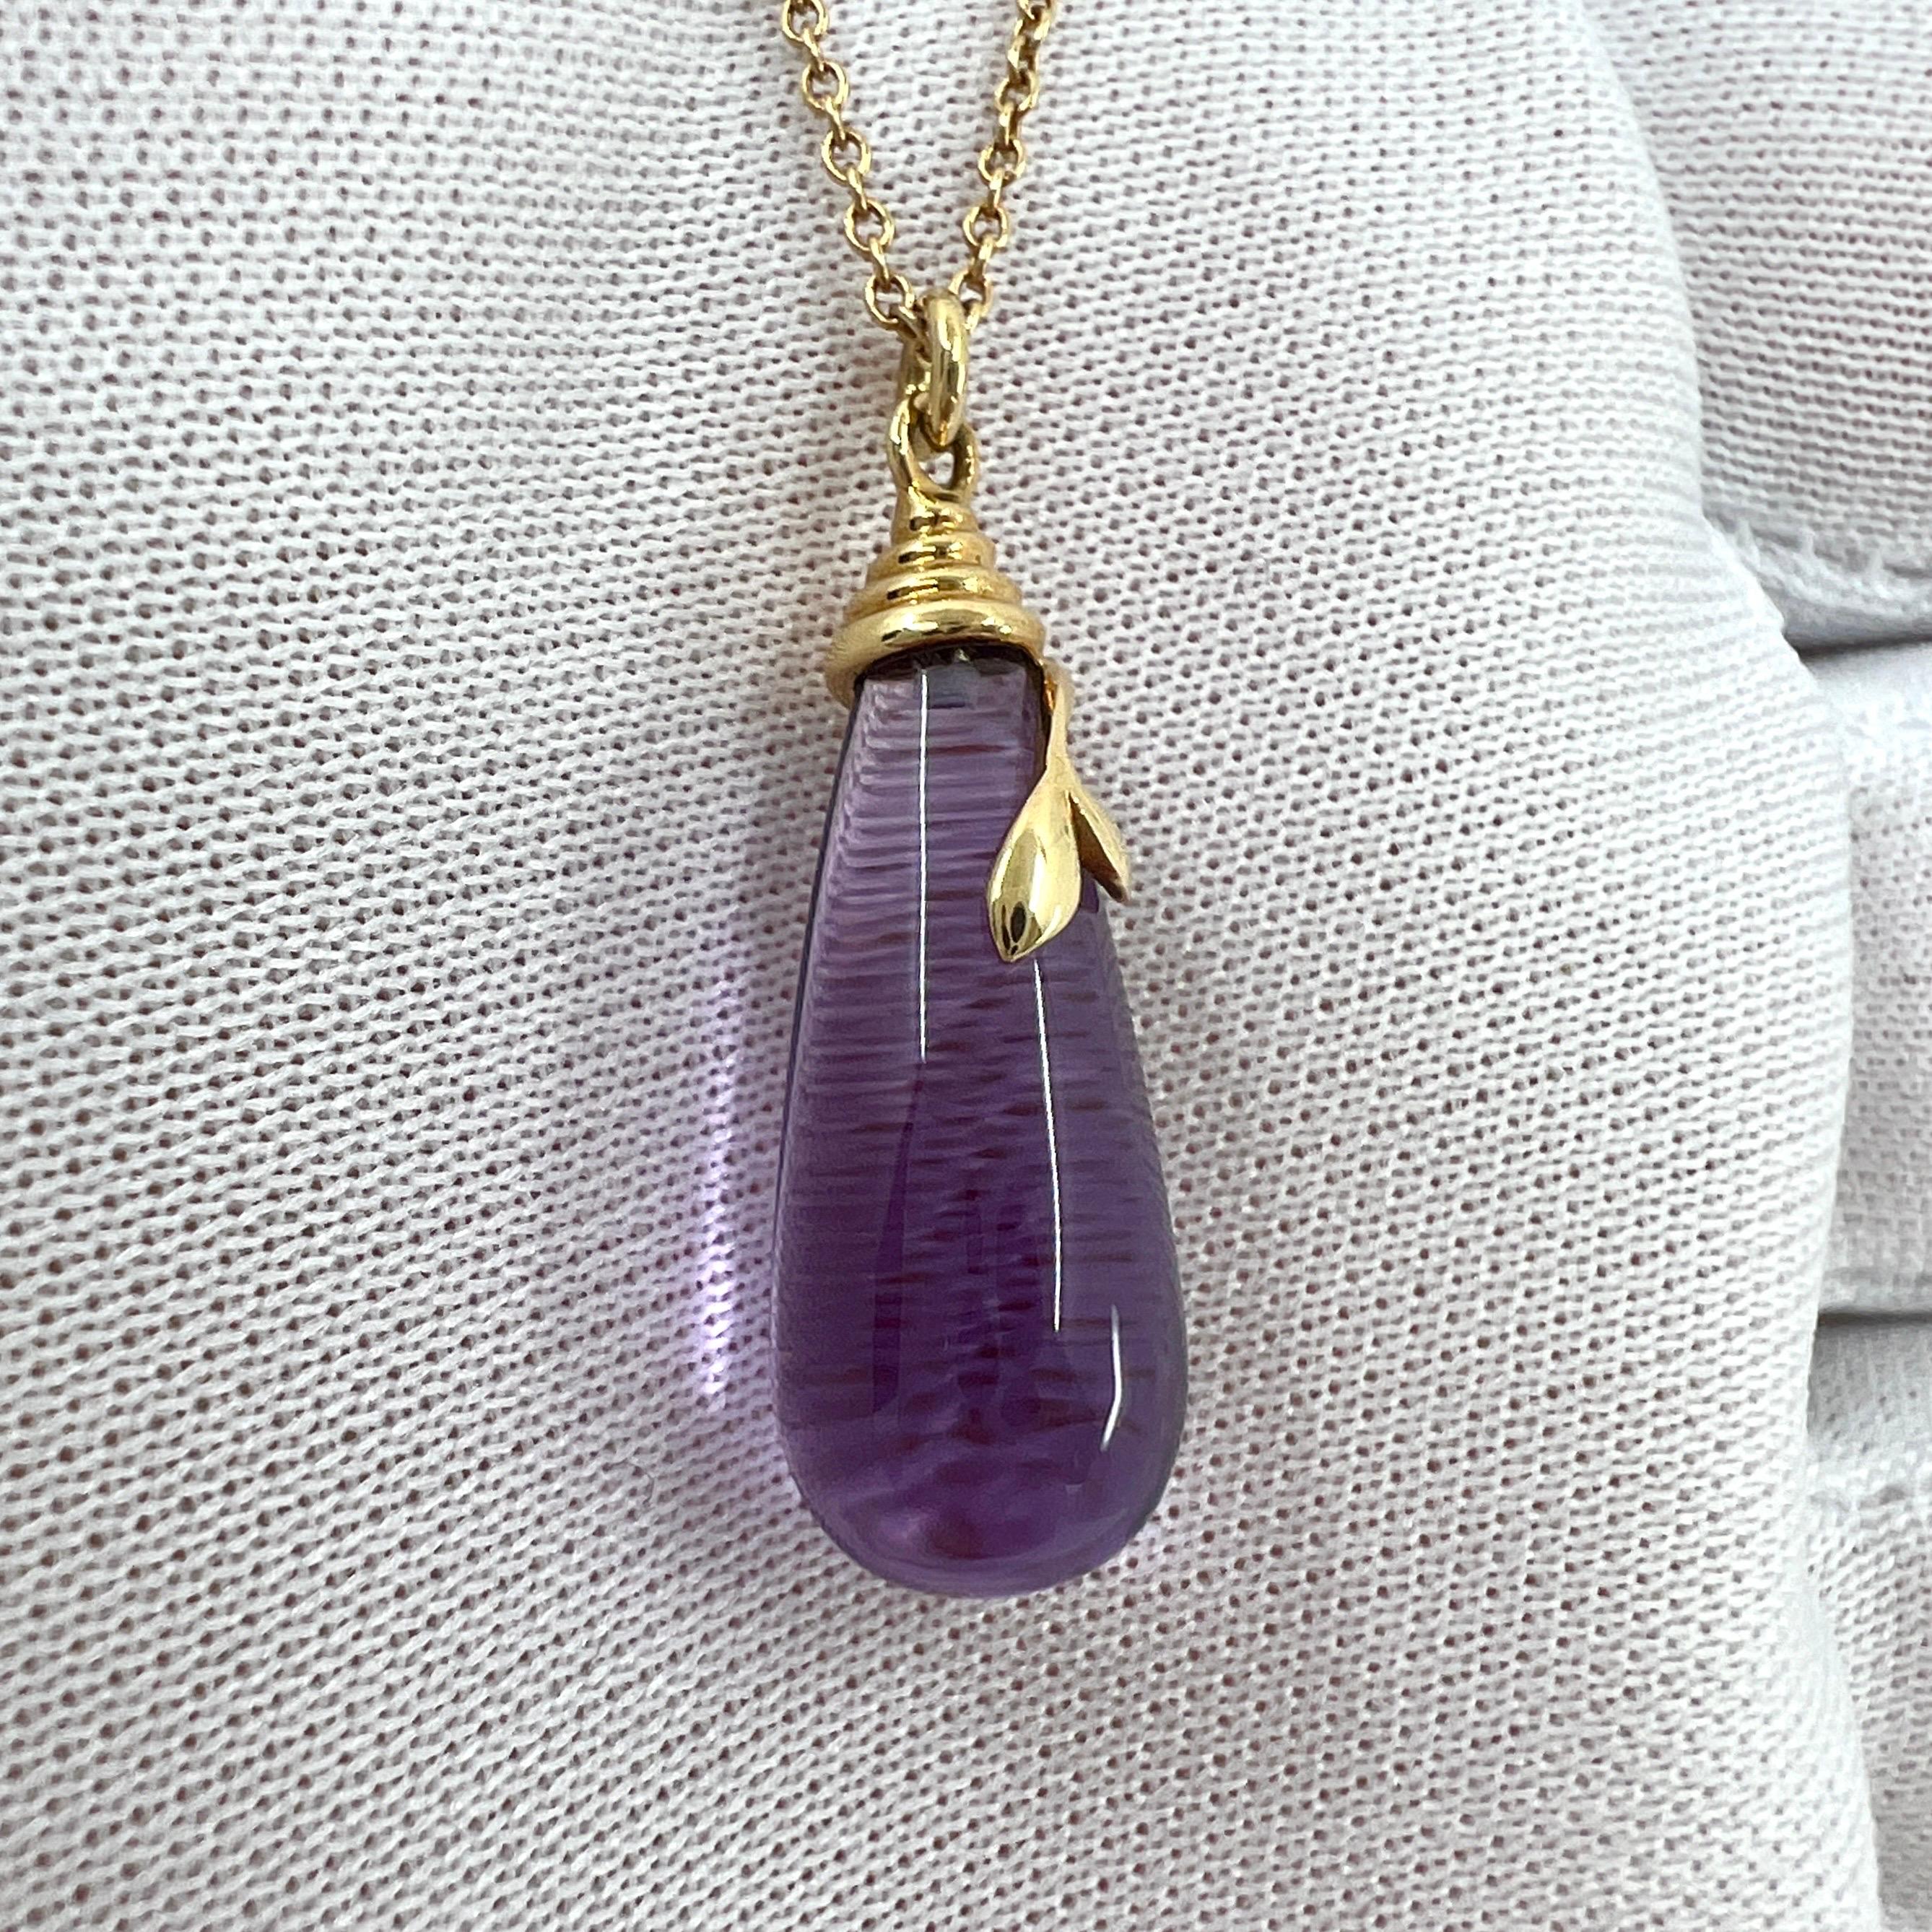 Rare Tiffany & Co. Paloma Picasso Olive Leaf Amethyst Gold Drop Pendant Necklace For Sale 1